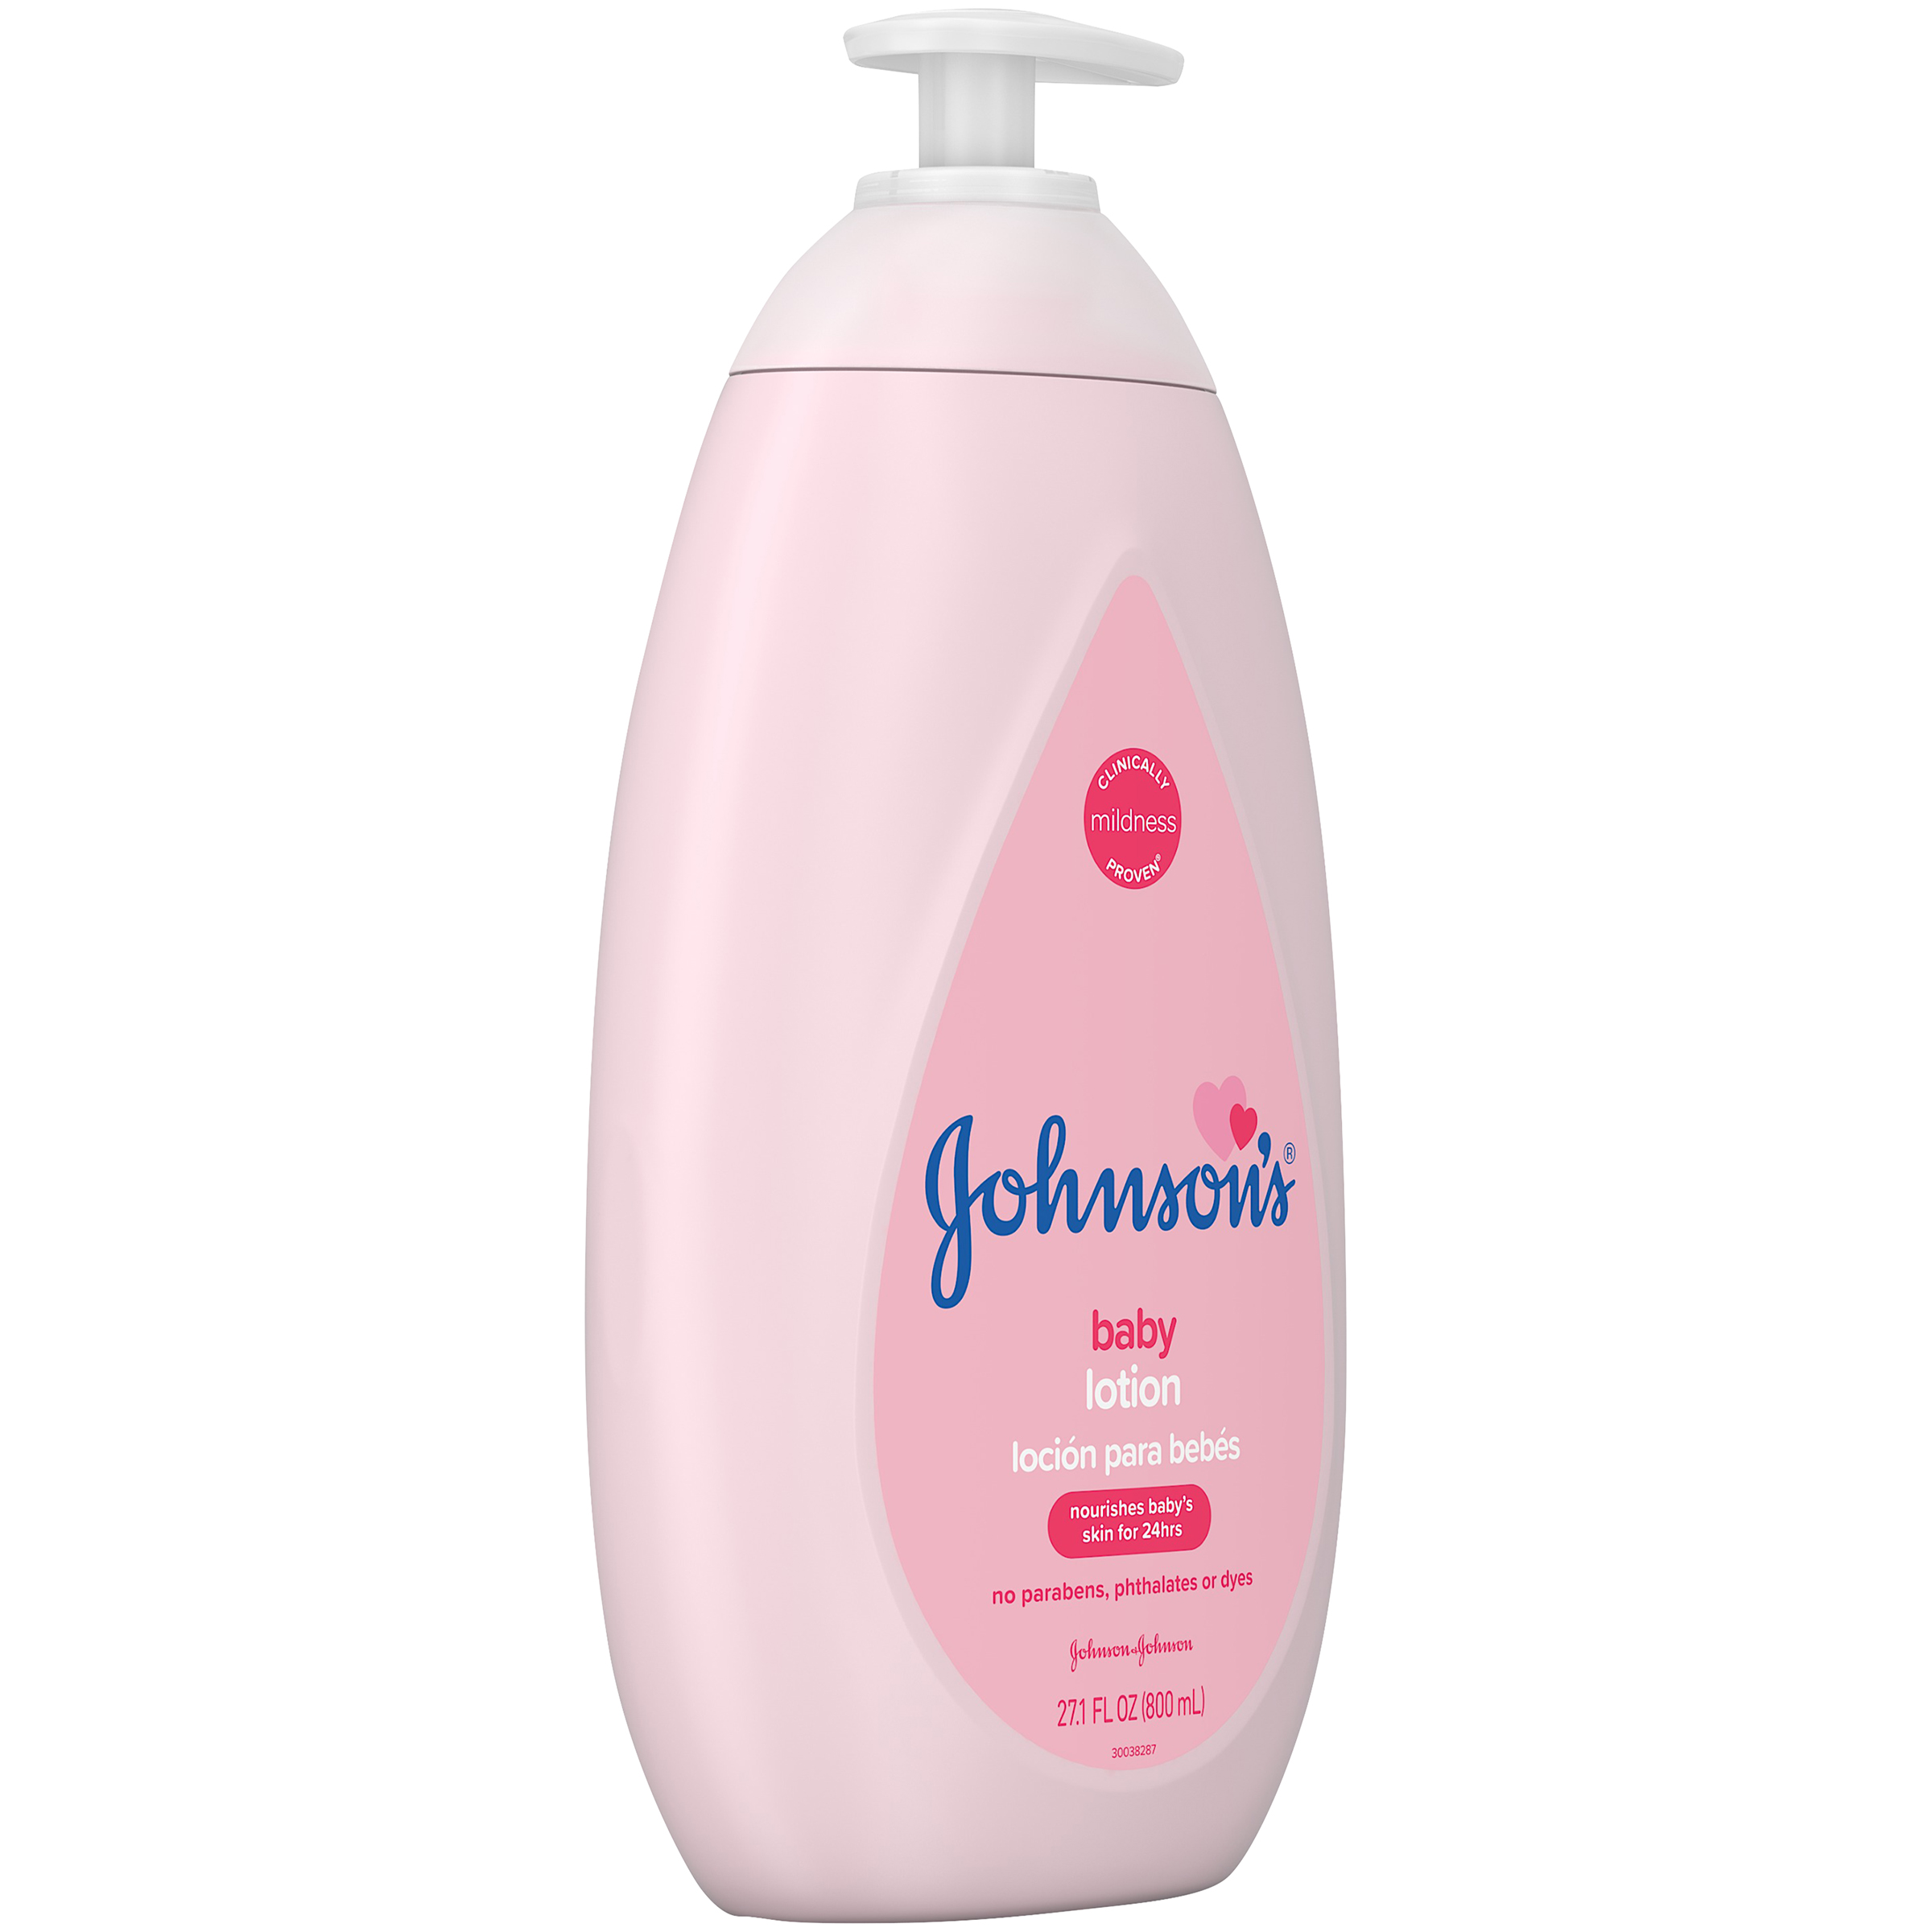 Johnson's  Moisturizing Pink Baby Lotion with Coconut Oil, 27.1 fl. oz